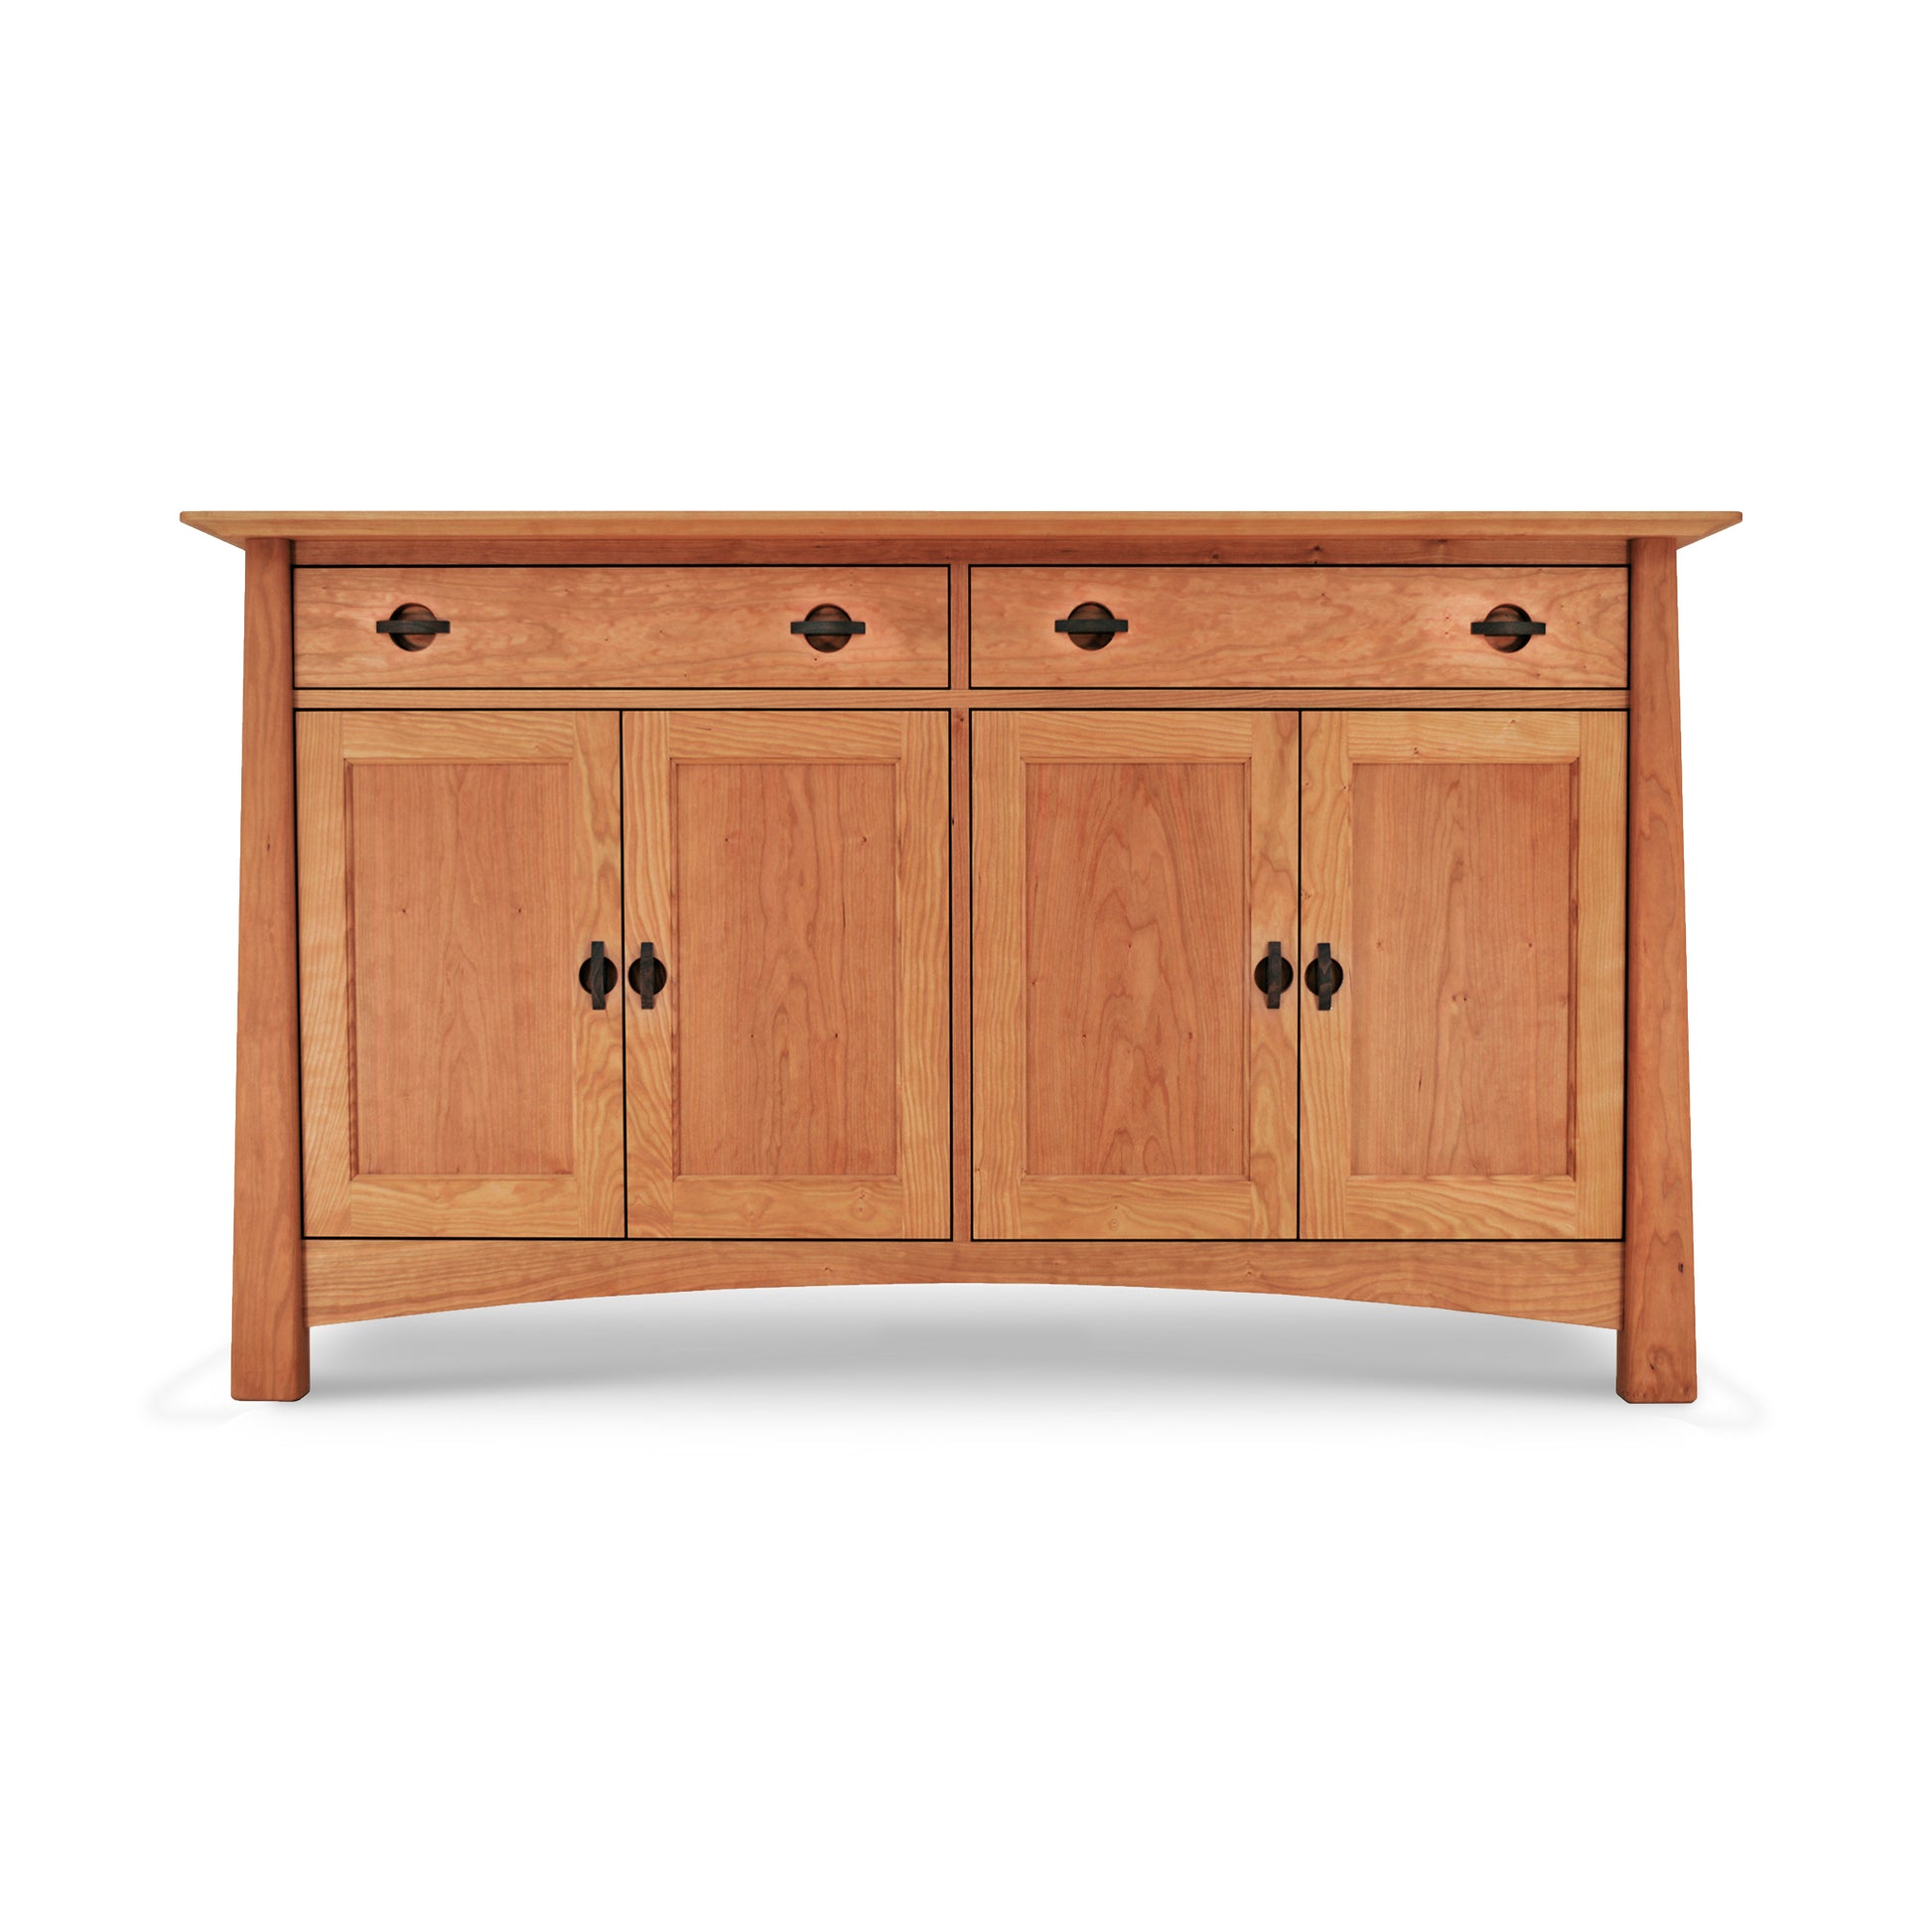 A Cherry Moon Large Sideboard with doors and drawers, made from sustainable hardwoods by Maple Corner Woodworks.